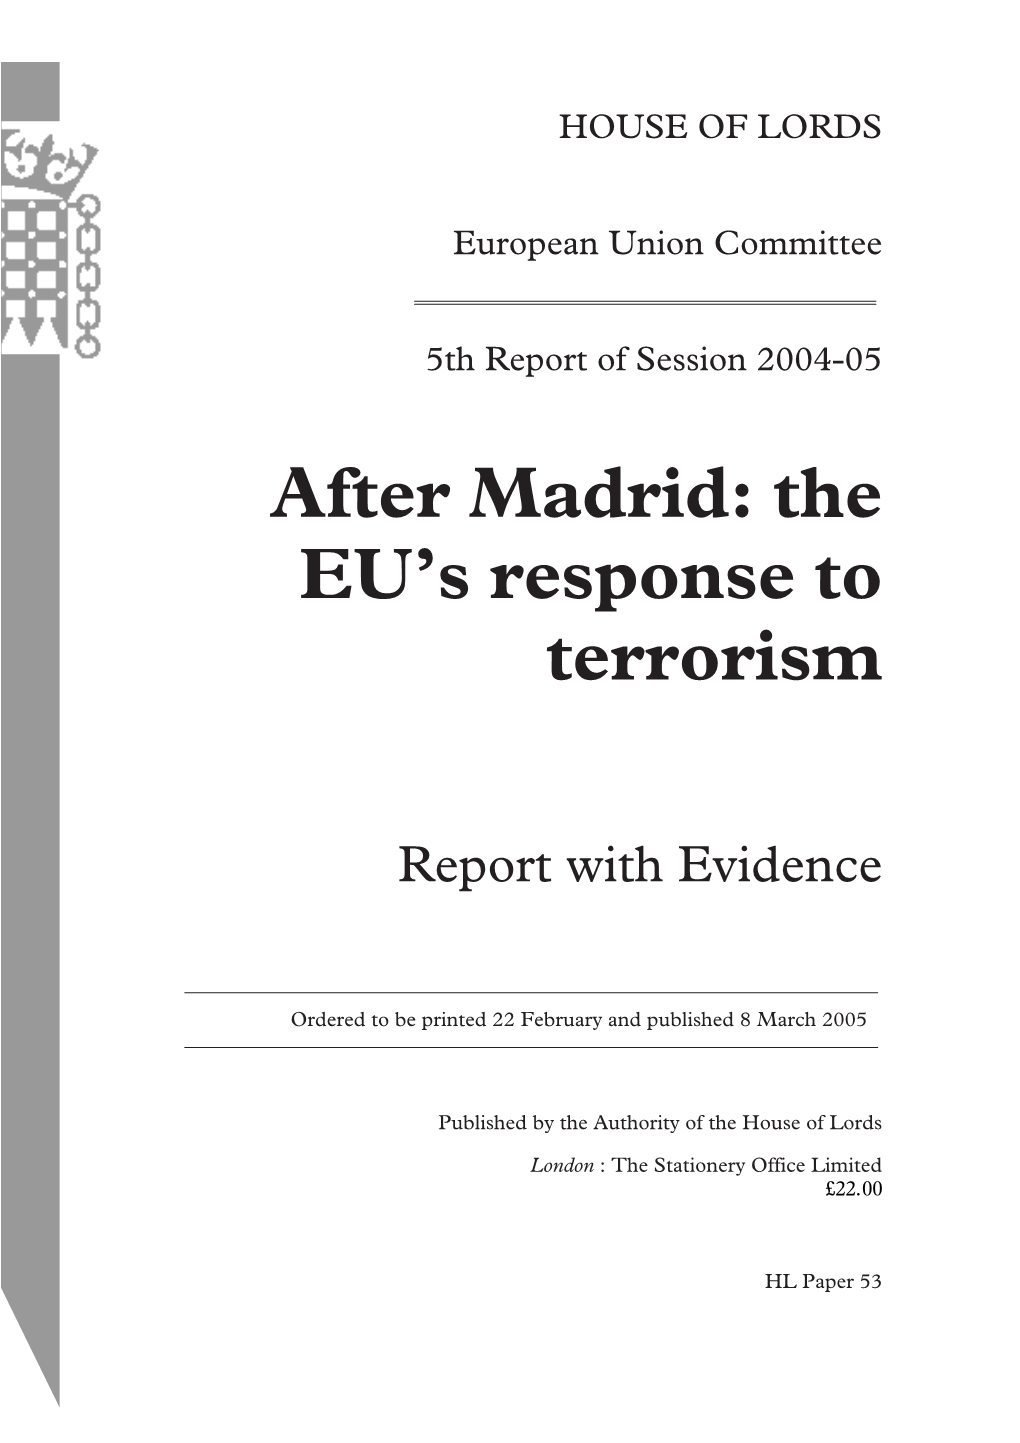 After Madrid: the Eu's Response to Terrorism